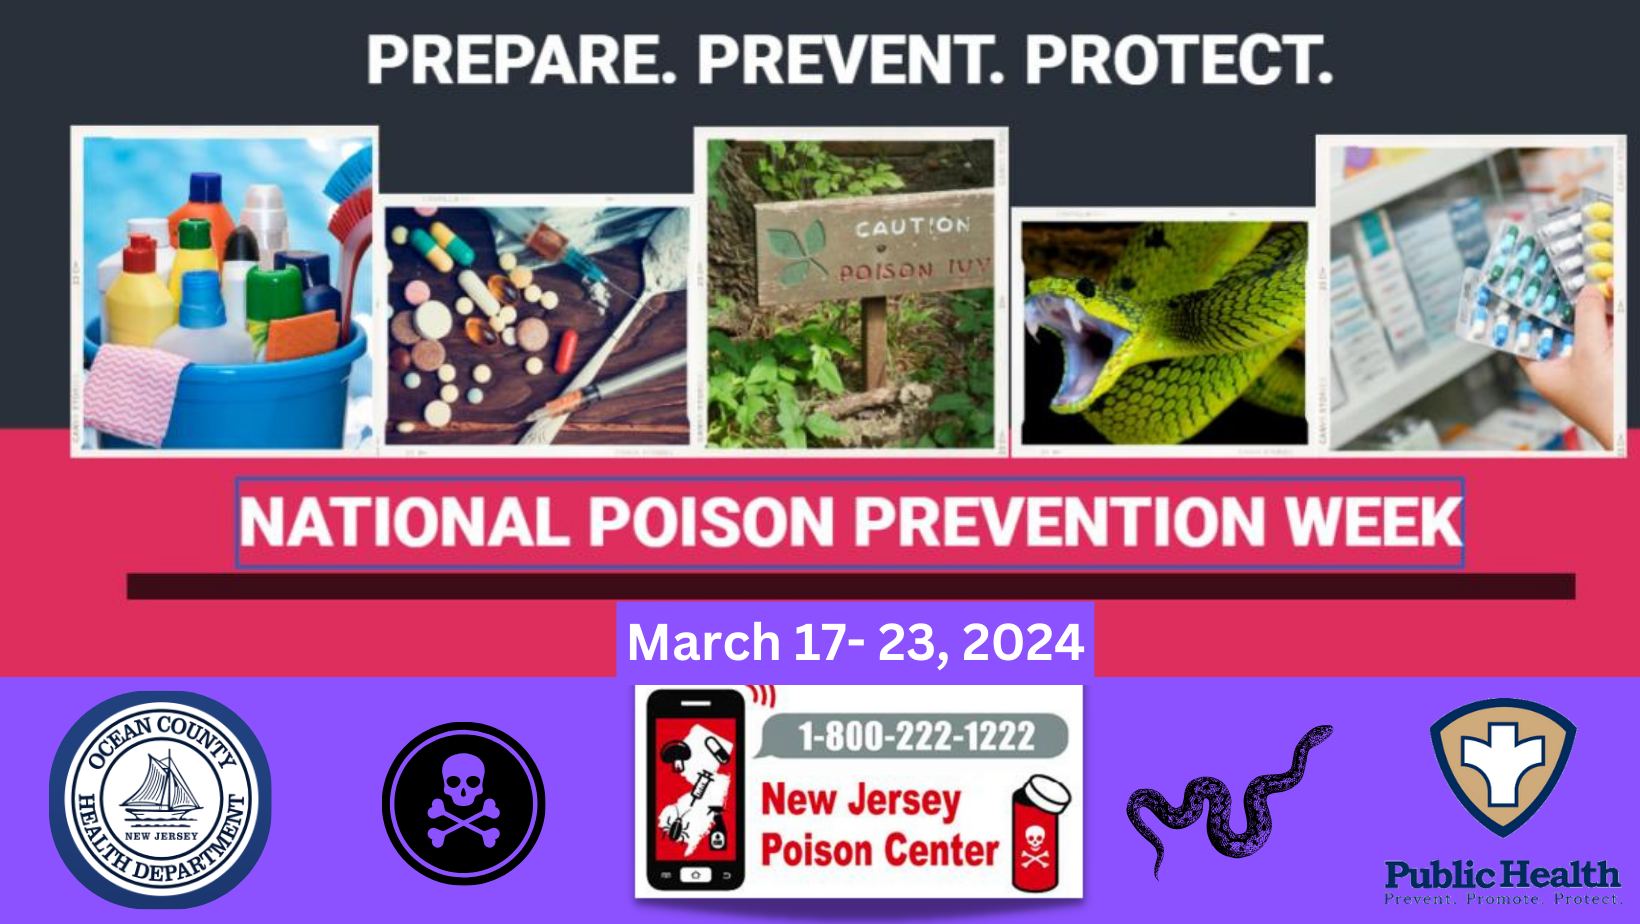 NATIONAL POISON PREVENTION WEEK IS MARCH 17-23, 2024